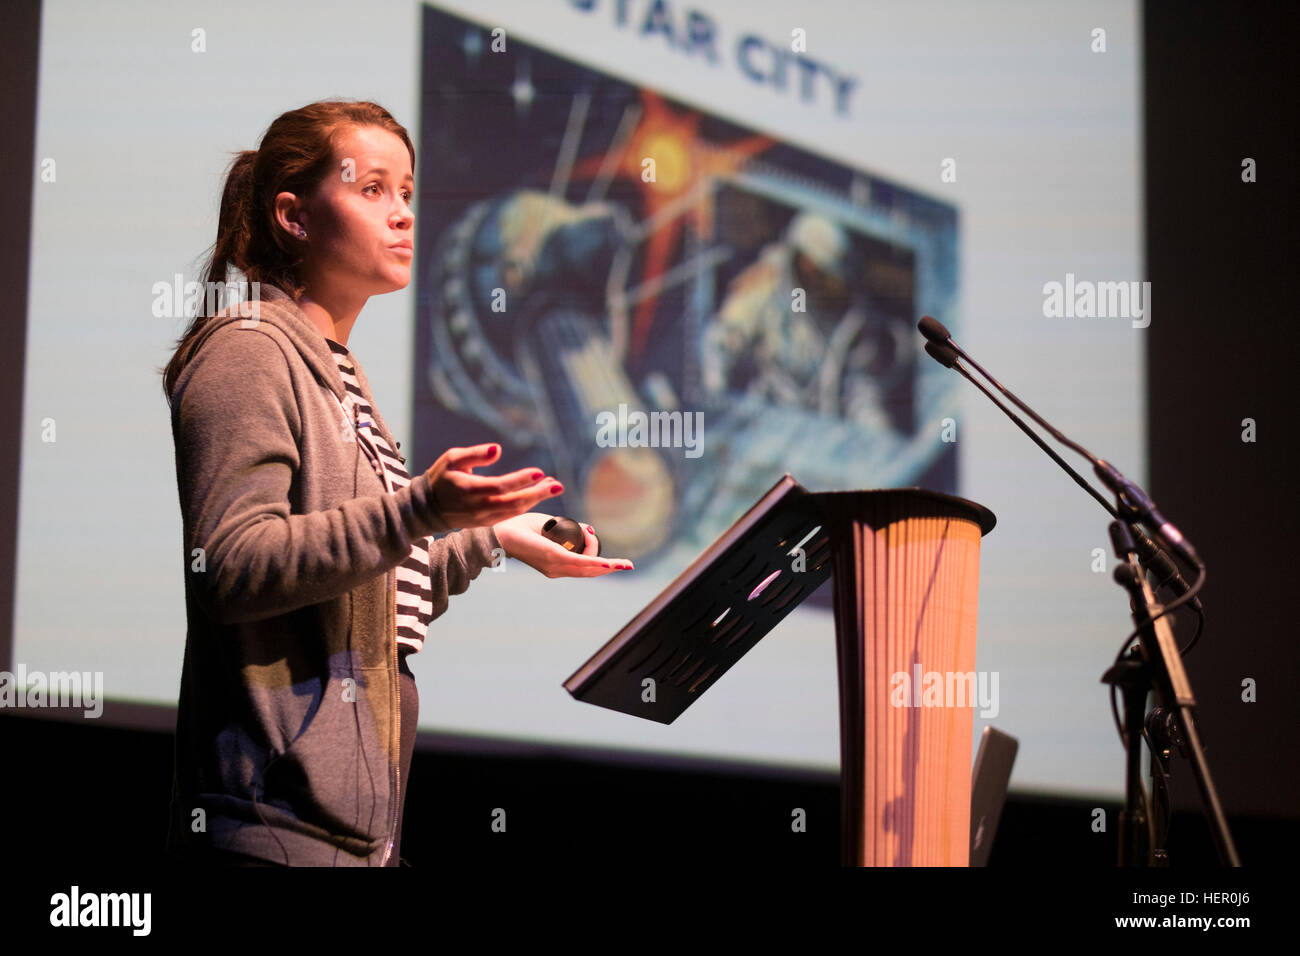 Young Russian photographer Maria Gruzdeva, speaking about her projects 'Space City' and 'Borders' at The Eye Festival of Documentary photography Aberystwyth Arts Centre, Wales UK Stock Photo